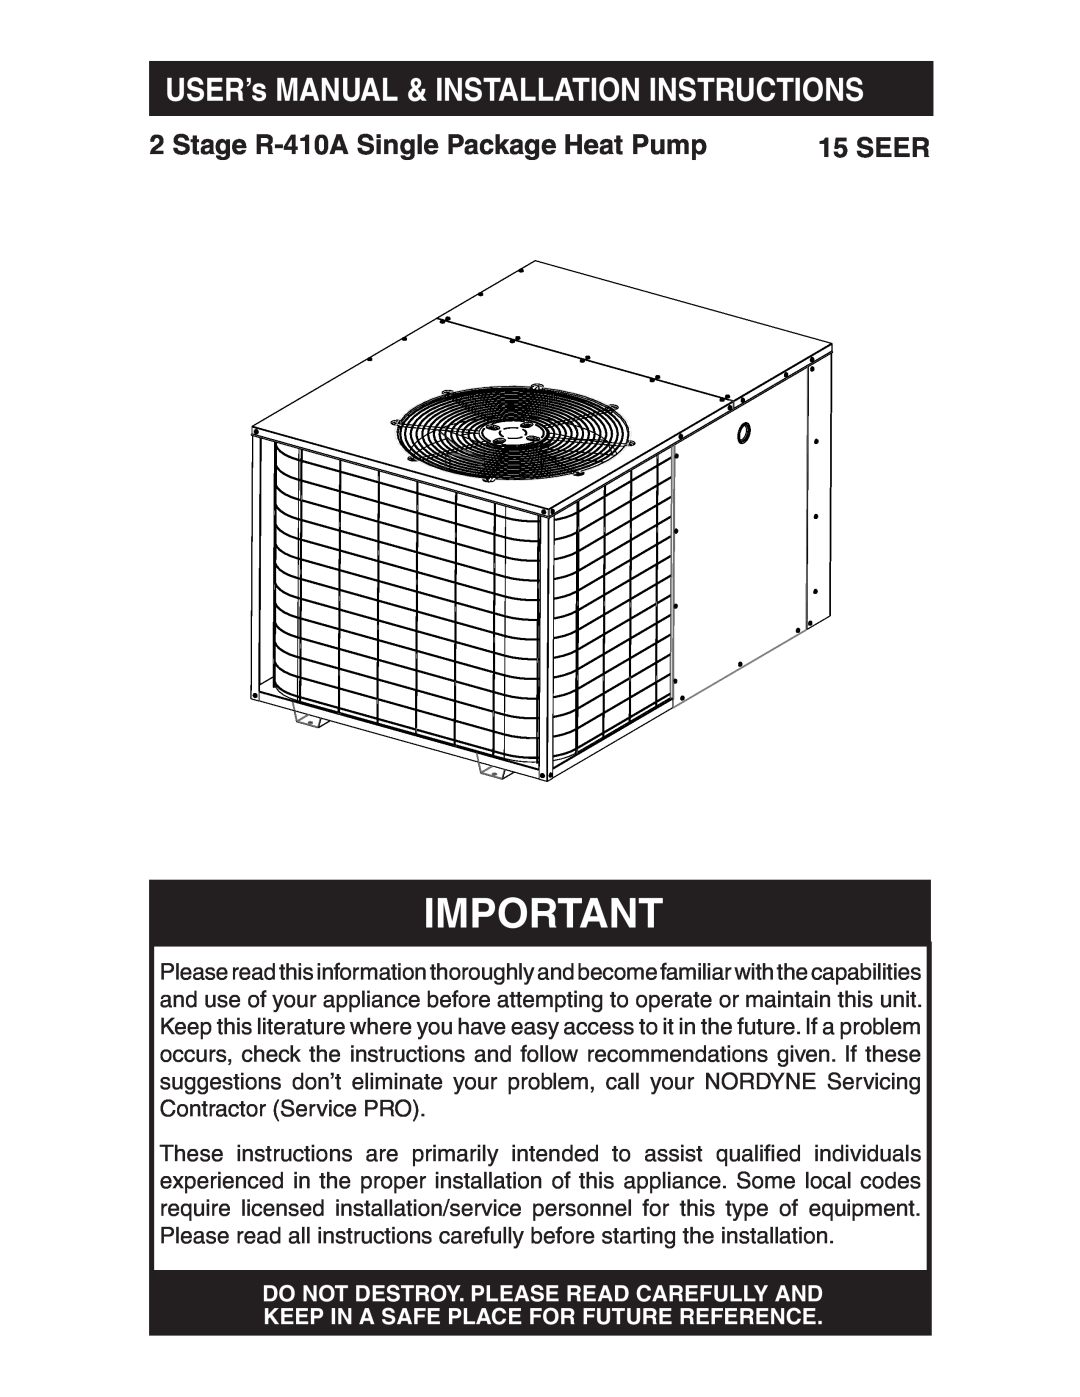 Nordyne R-410A installation instructions Heat Pump Principle of Operation, Winter Heating, Summer Cooling 